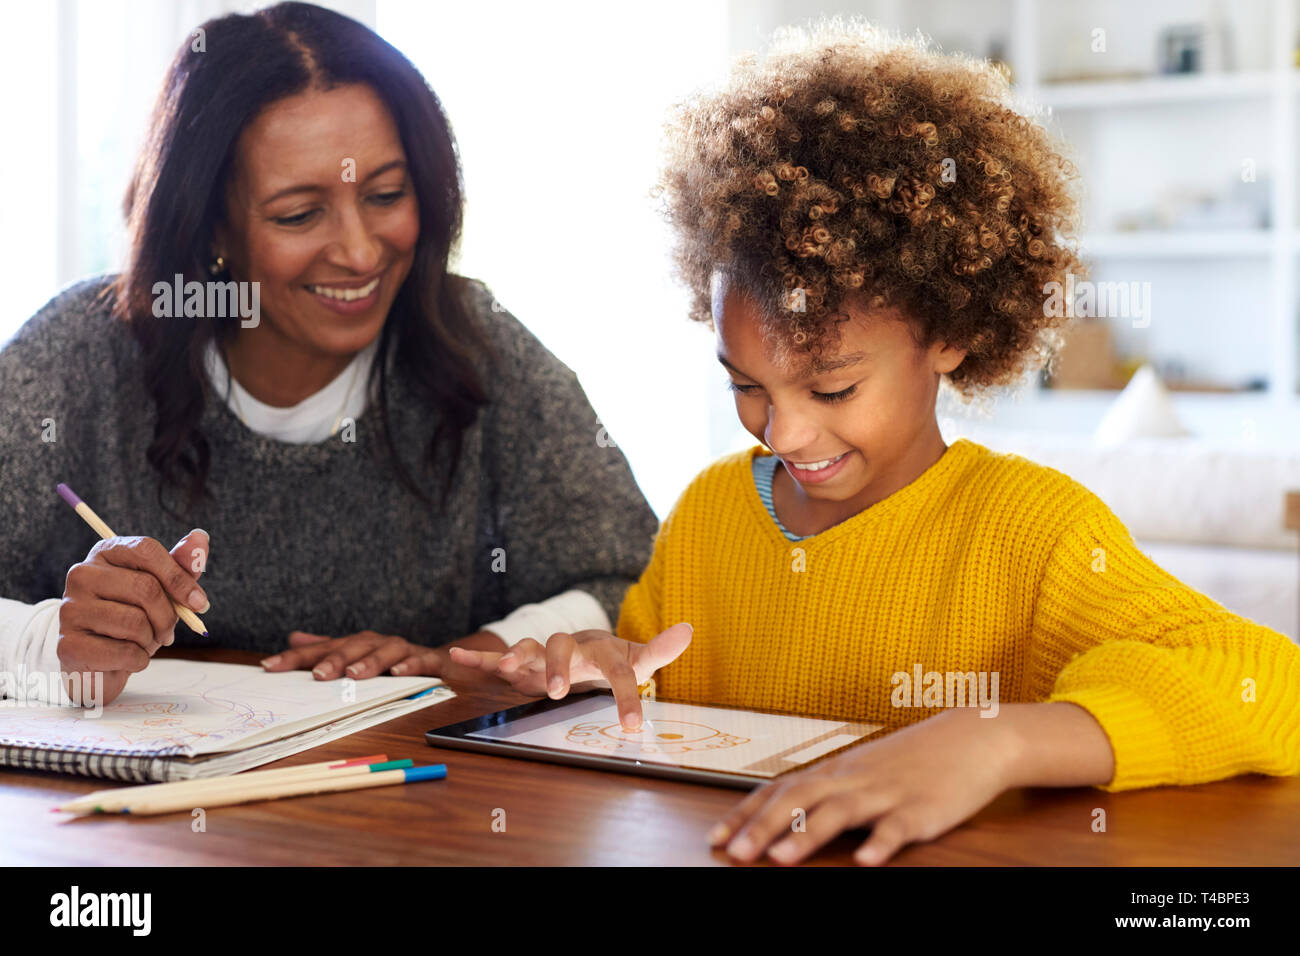 Mixed race young grandmother sitting at table doing homework with her granddaughter using a tablet computer, close up Stock Photo